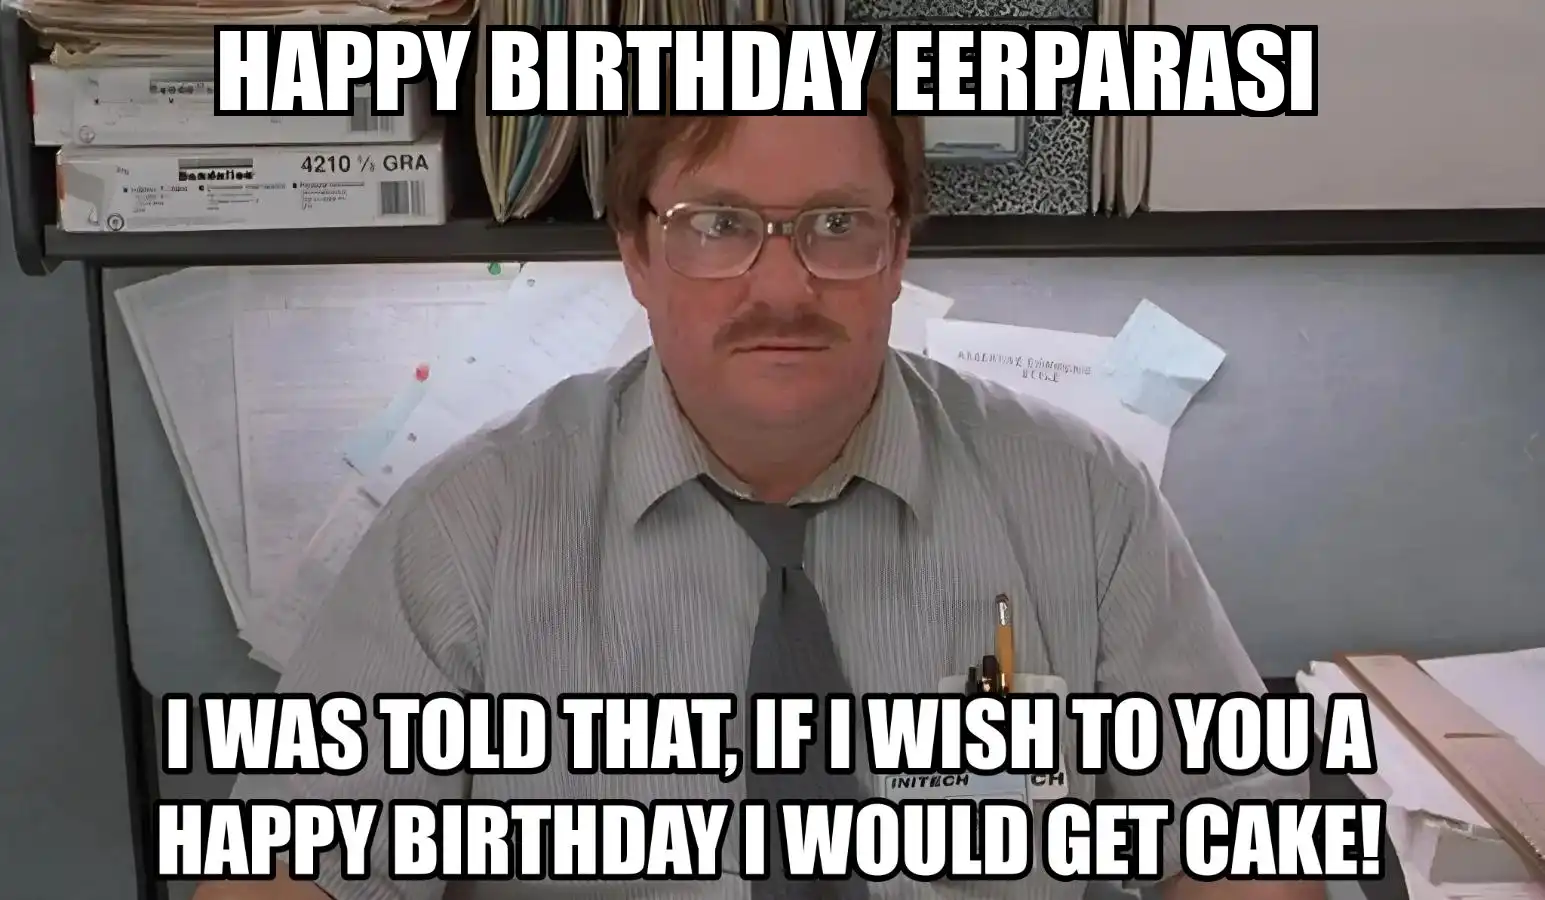 Happy Birthday Eerparasi I Would Get A Cake Meme